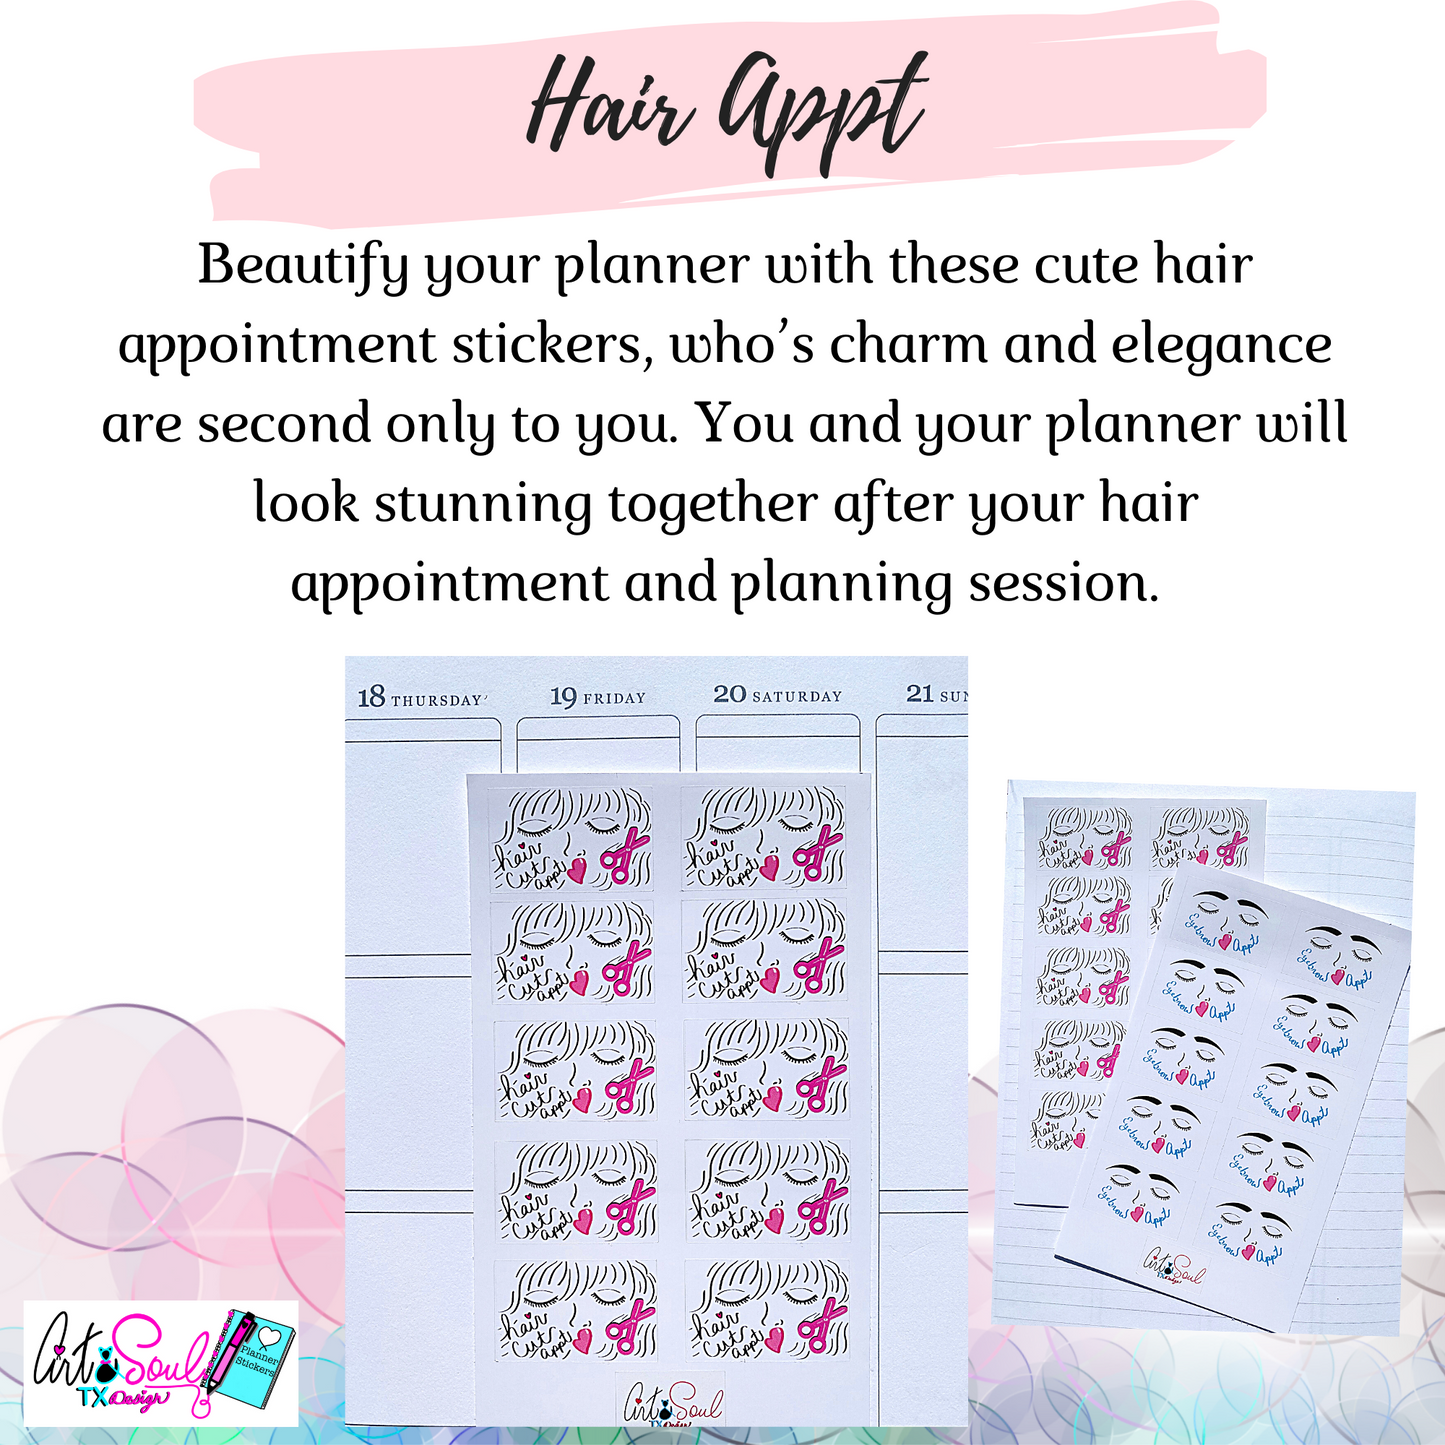 Hair Cut, Beauty Appointment Stickers